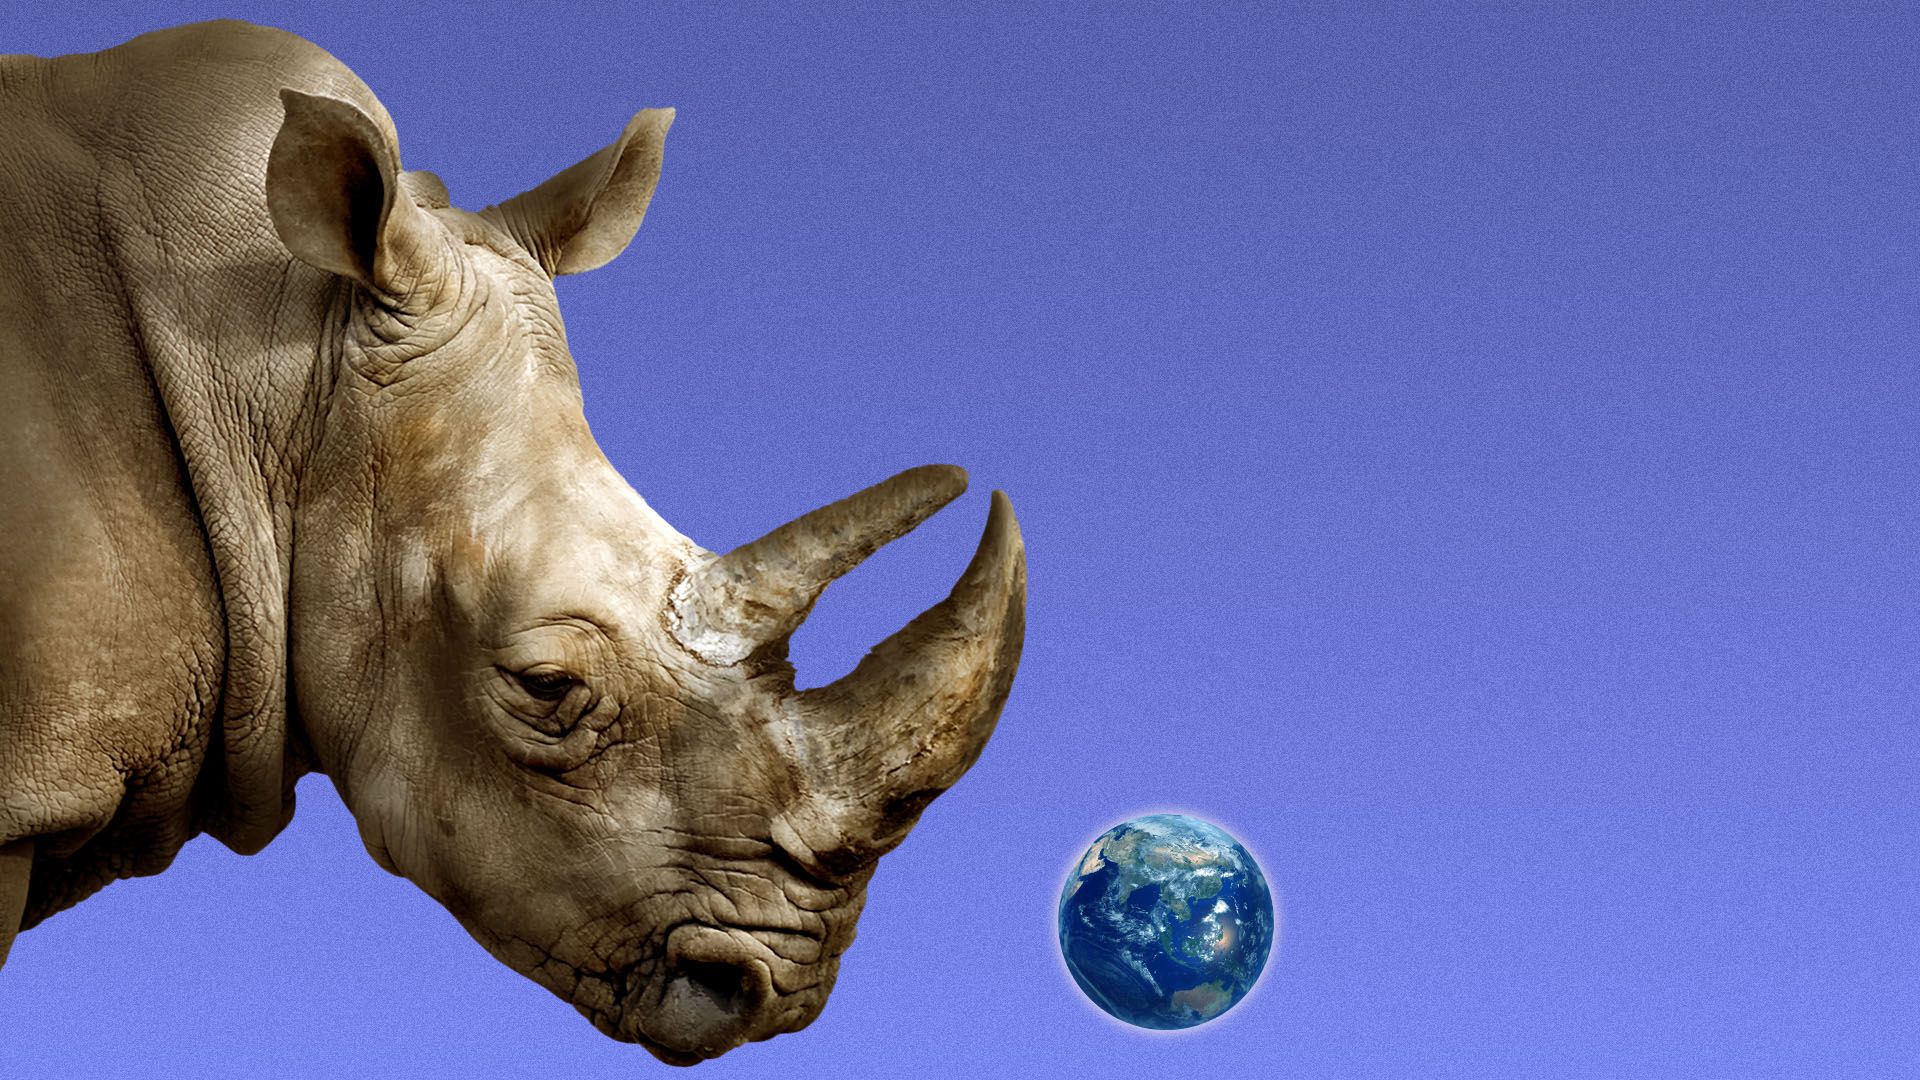 Illustration of a giant rhino facing a tiny earth.